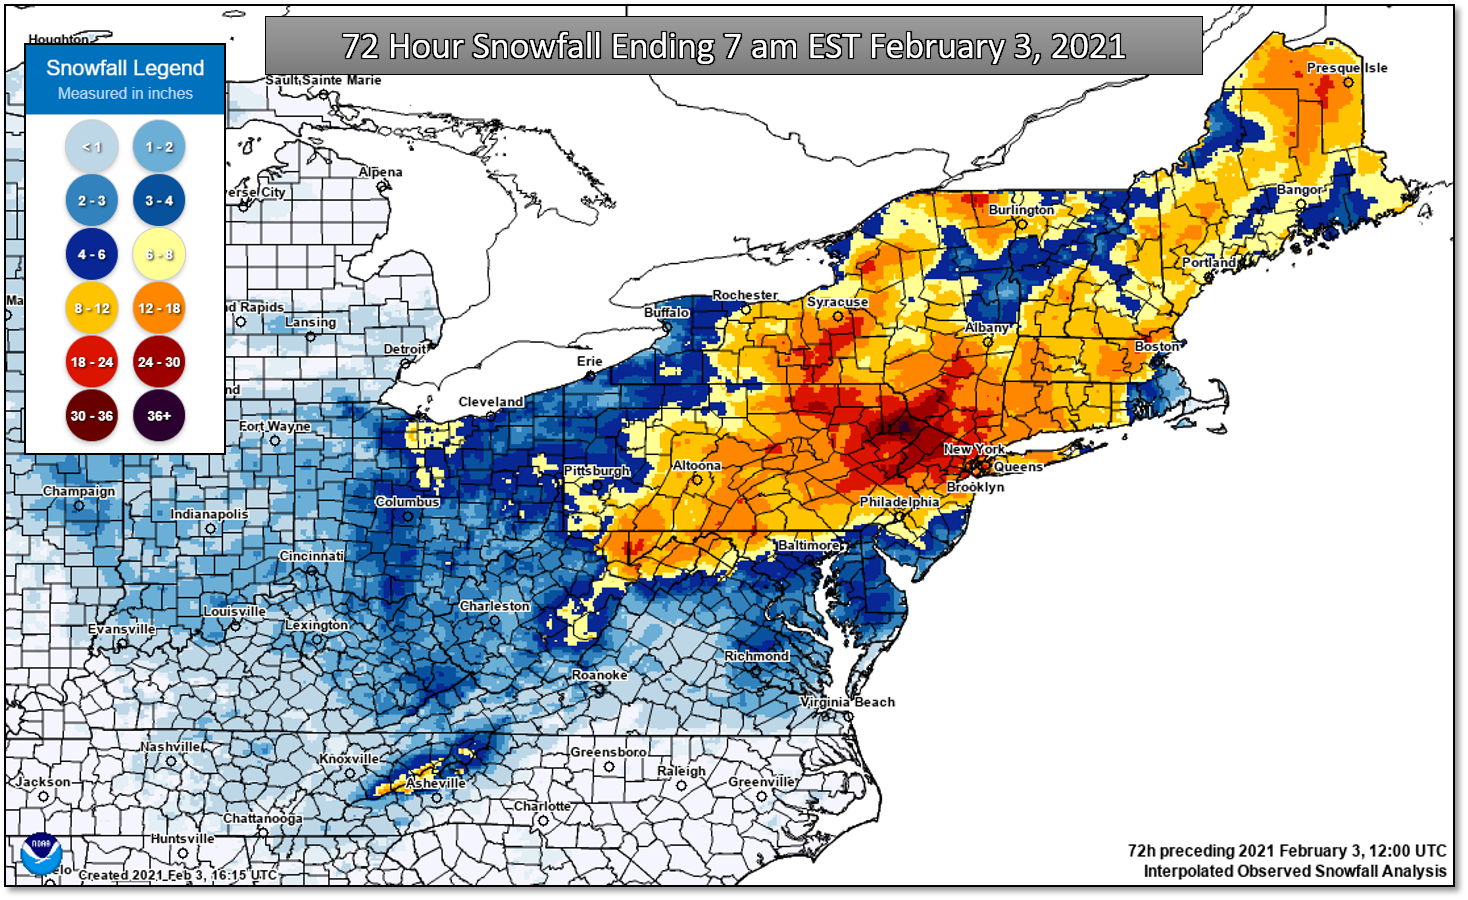 Storm Total Snowfall January 30 through the morning of February 3, 2021